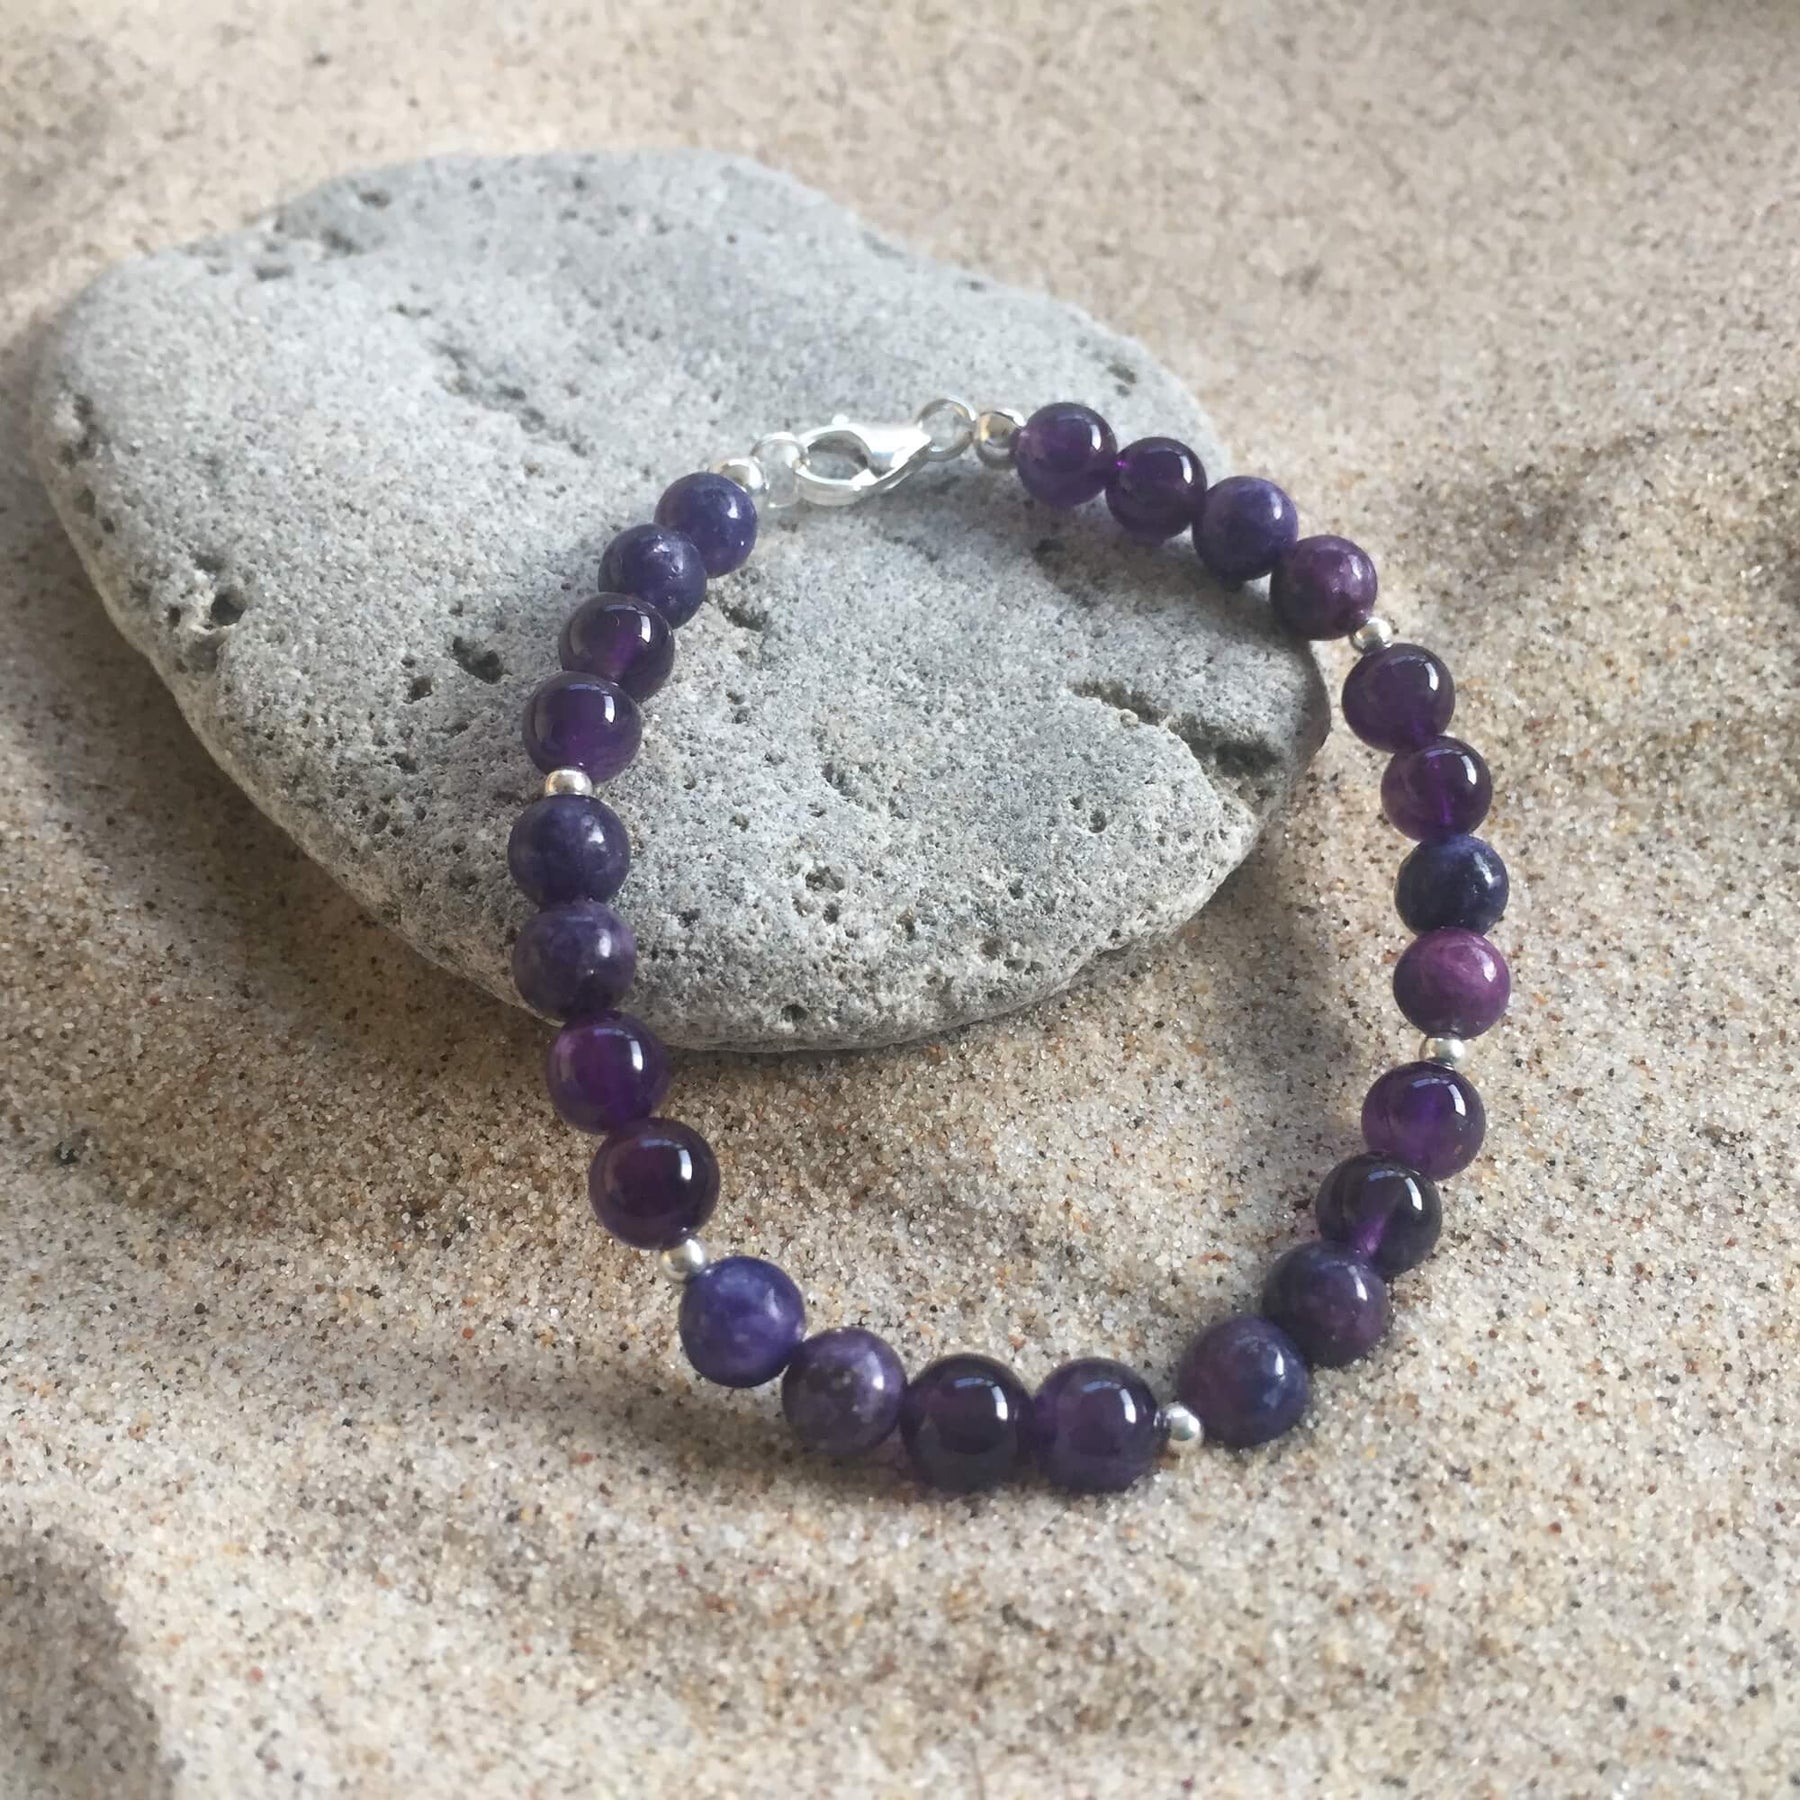 Buy Arka Surya Crystals Natural Lepidolite 8mm bead healing bracelet for  stress , anxiety & unbalanced emotions relief & Calming Intuition for  Powerful Protection Online at Best Prices in India - JioMart.